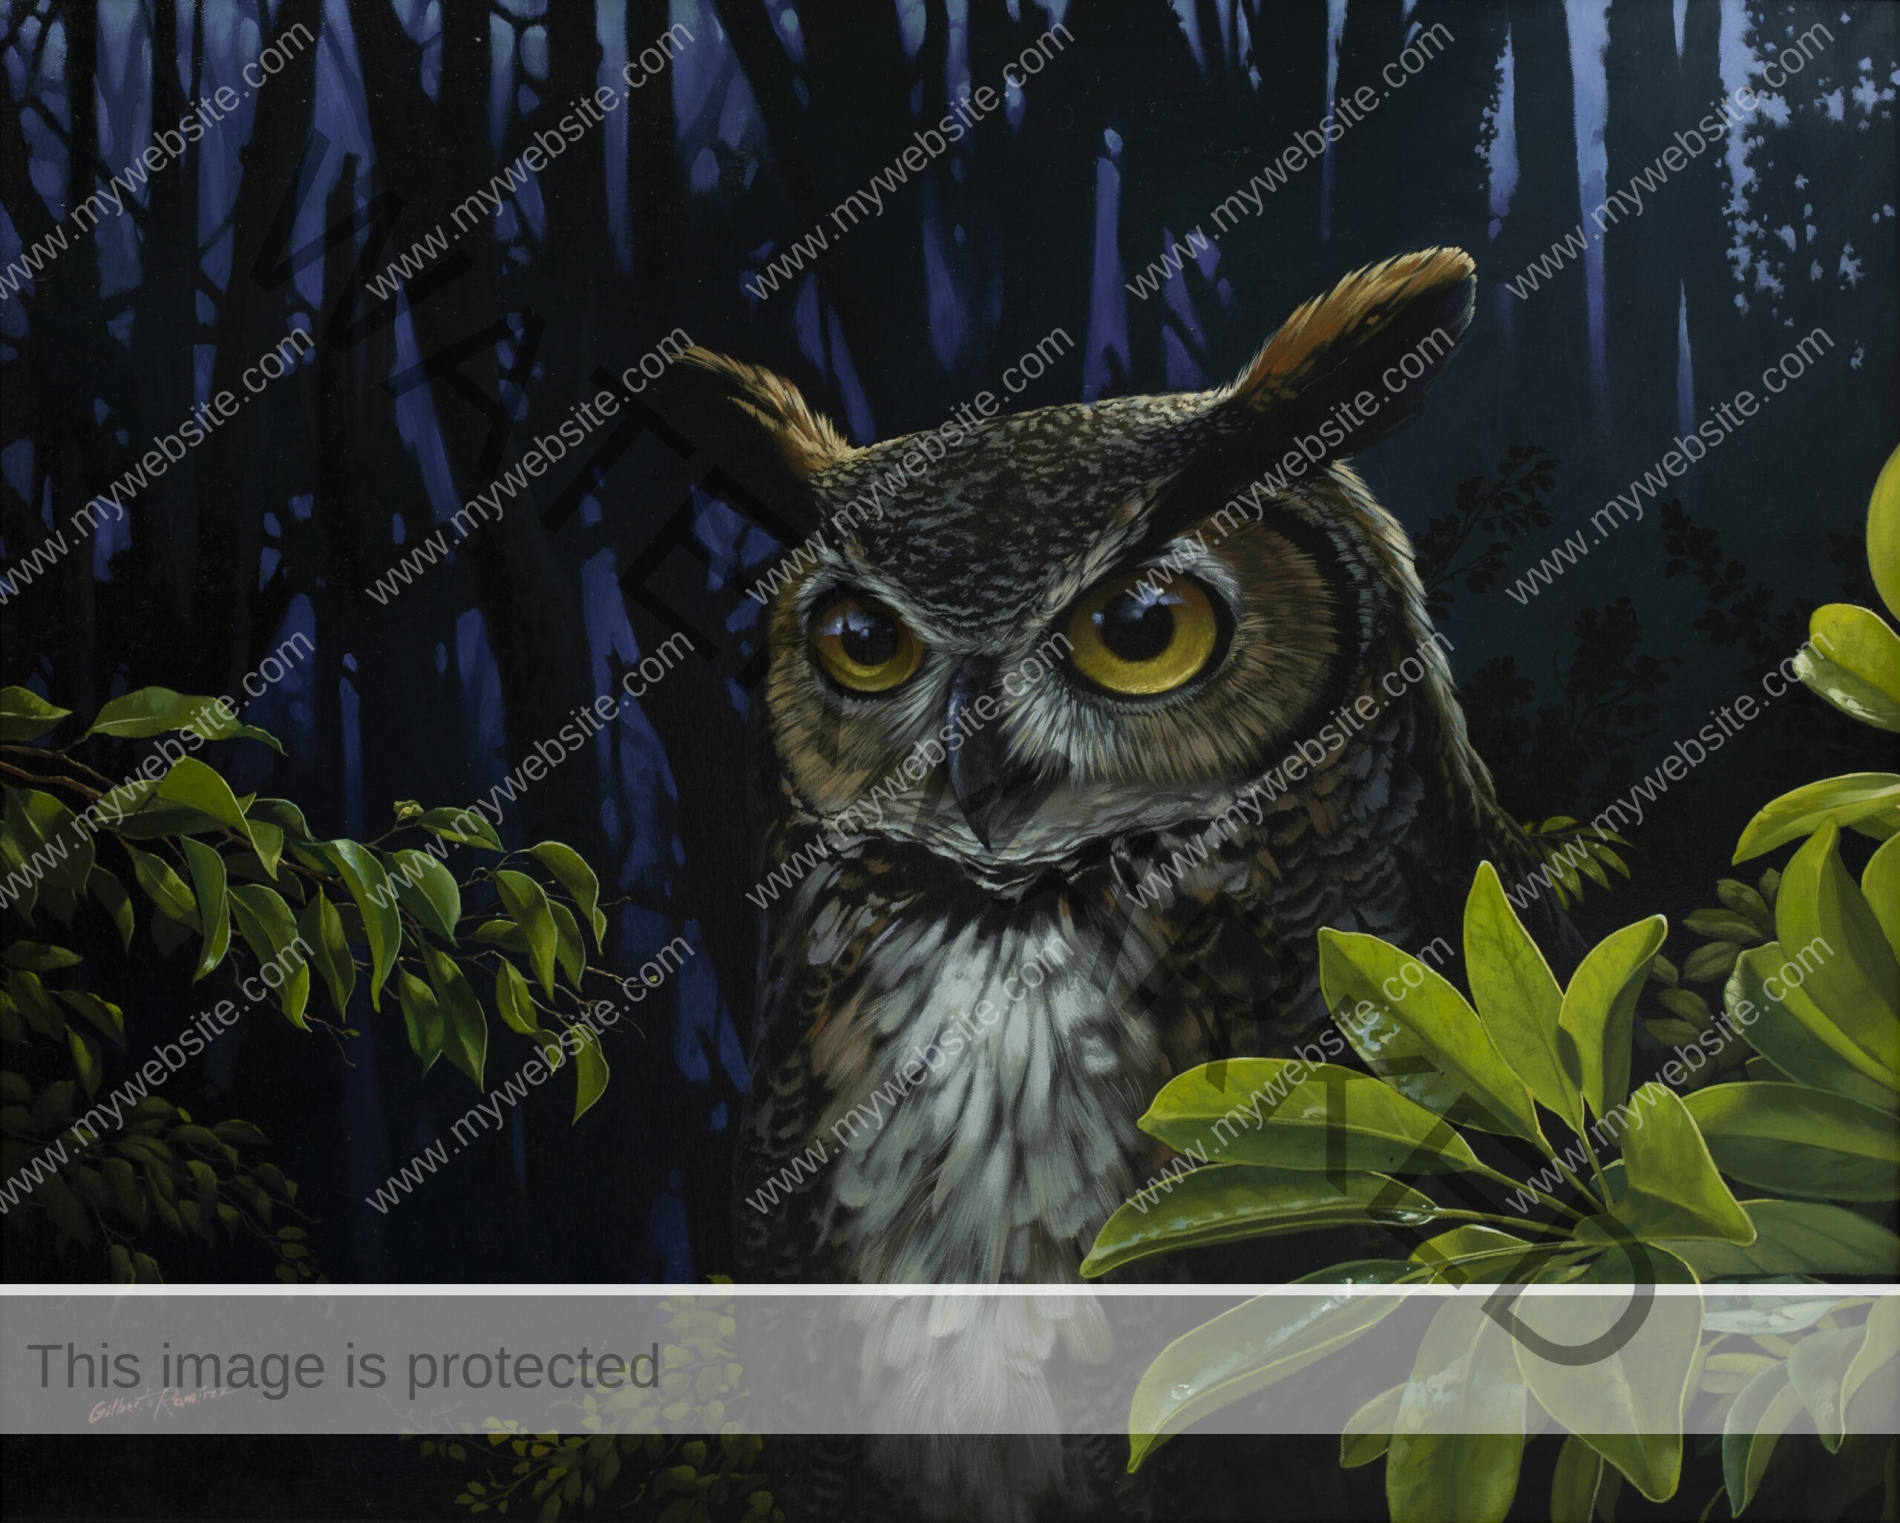 Hyperreal oil painting of an owl in a Costa Rican forest by Gilberto Ramírez. Hyperreal owl painting